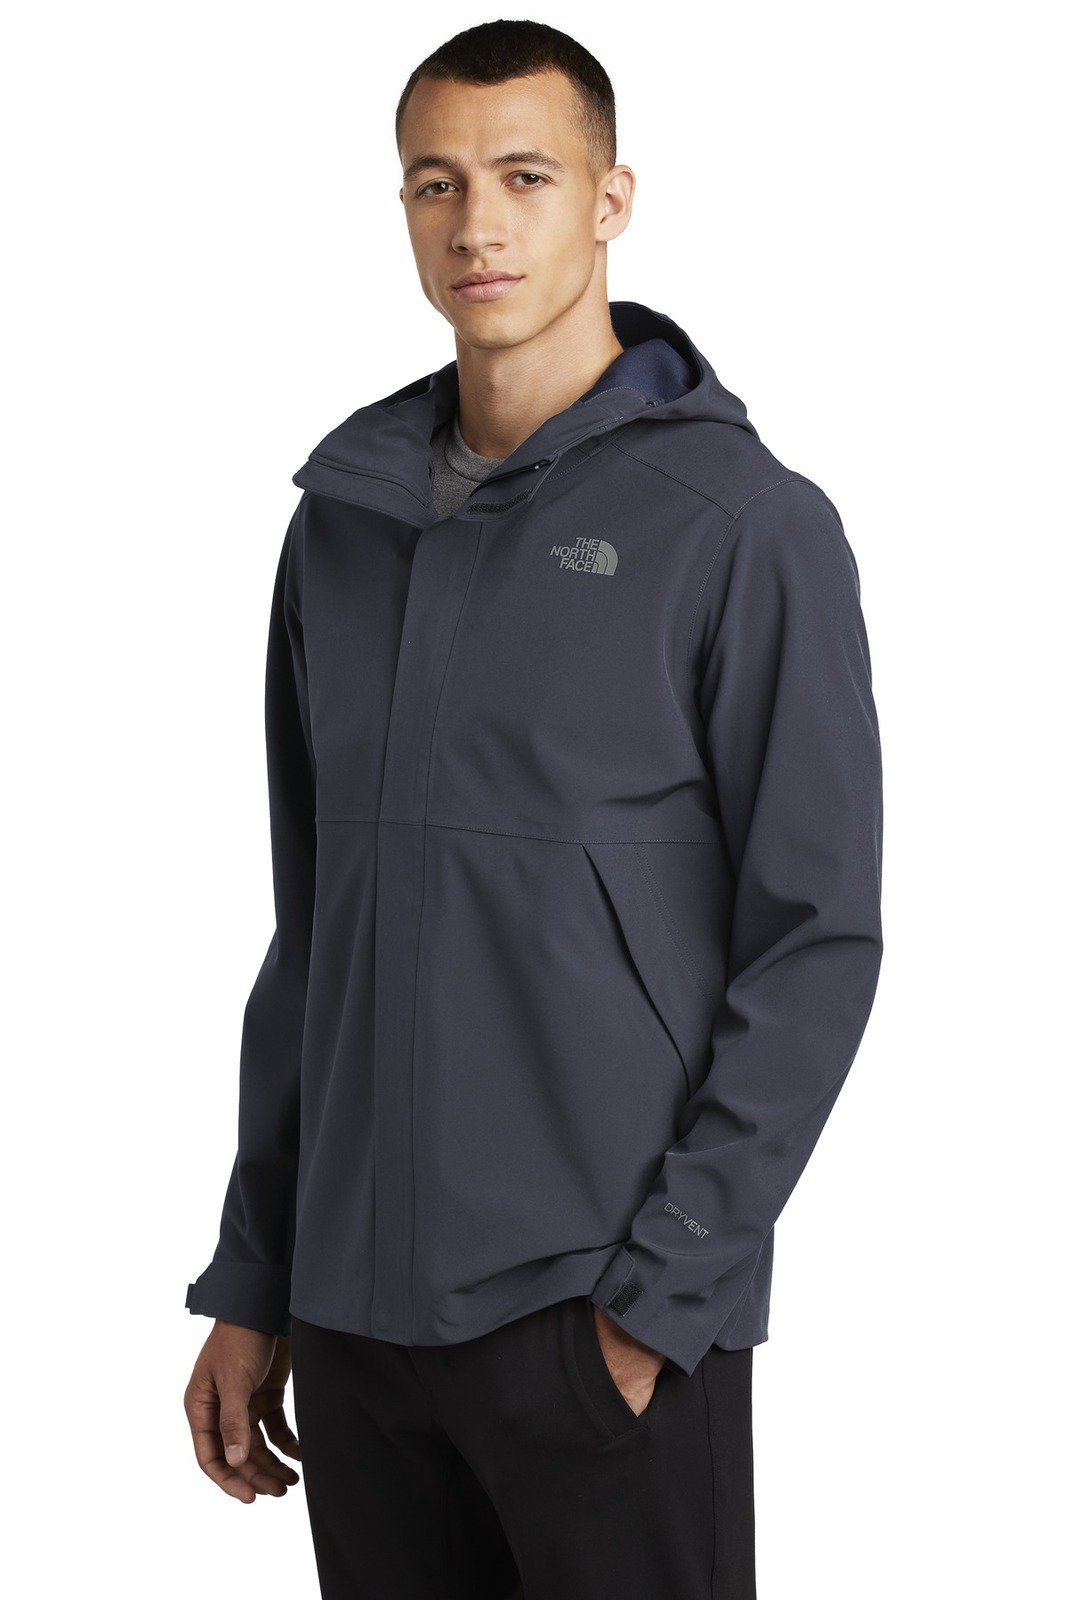 Northface Jackets withers and co